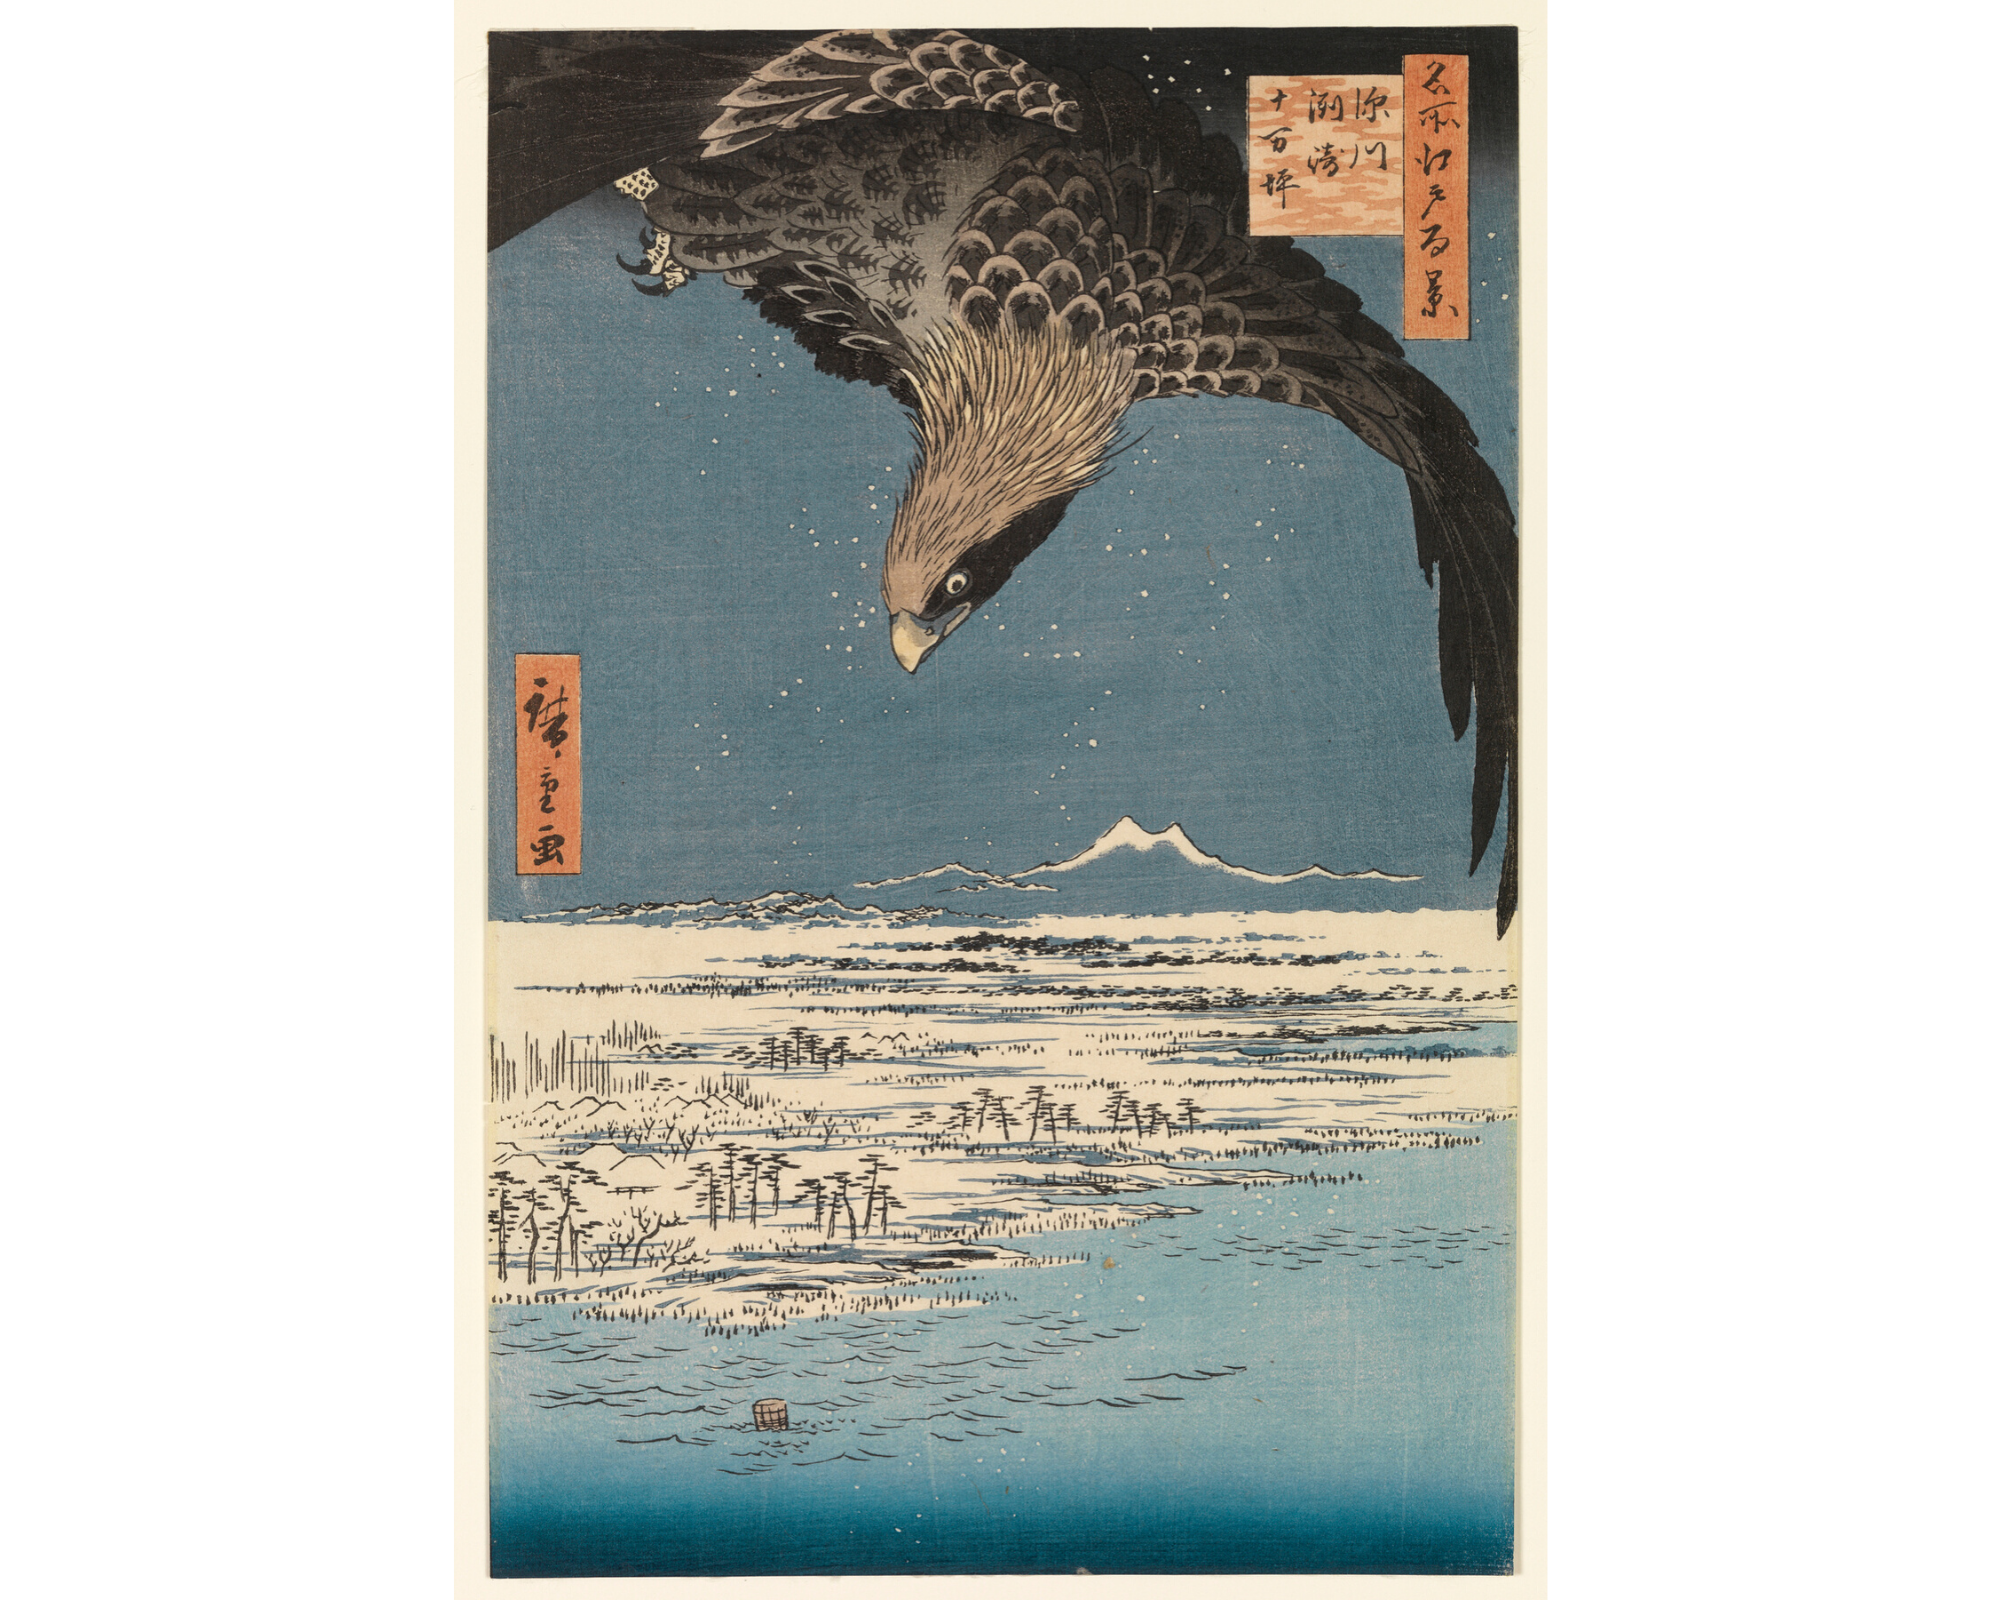 Utagawa Hiroshige, Japanese (1797-1858). Fukagawa Susaki Jumantsubo from One Hundred Famous Views of Edo, 1857, woodcut printed in color on paper, Gift of Mr. and Mrs. James Barker (Margaret Clark Rankin, class of 1908) "The Margaret Rankin Barker - Isaac Ogden Rankin Collection of Oriental Art", SC 1968.467